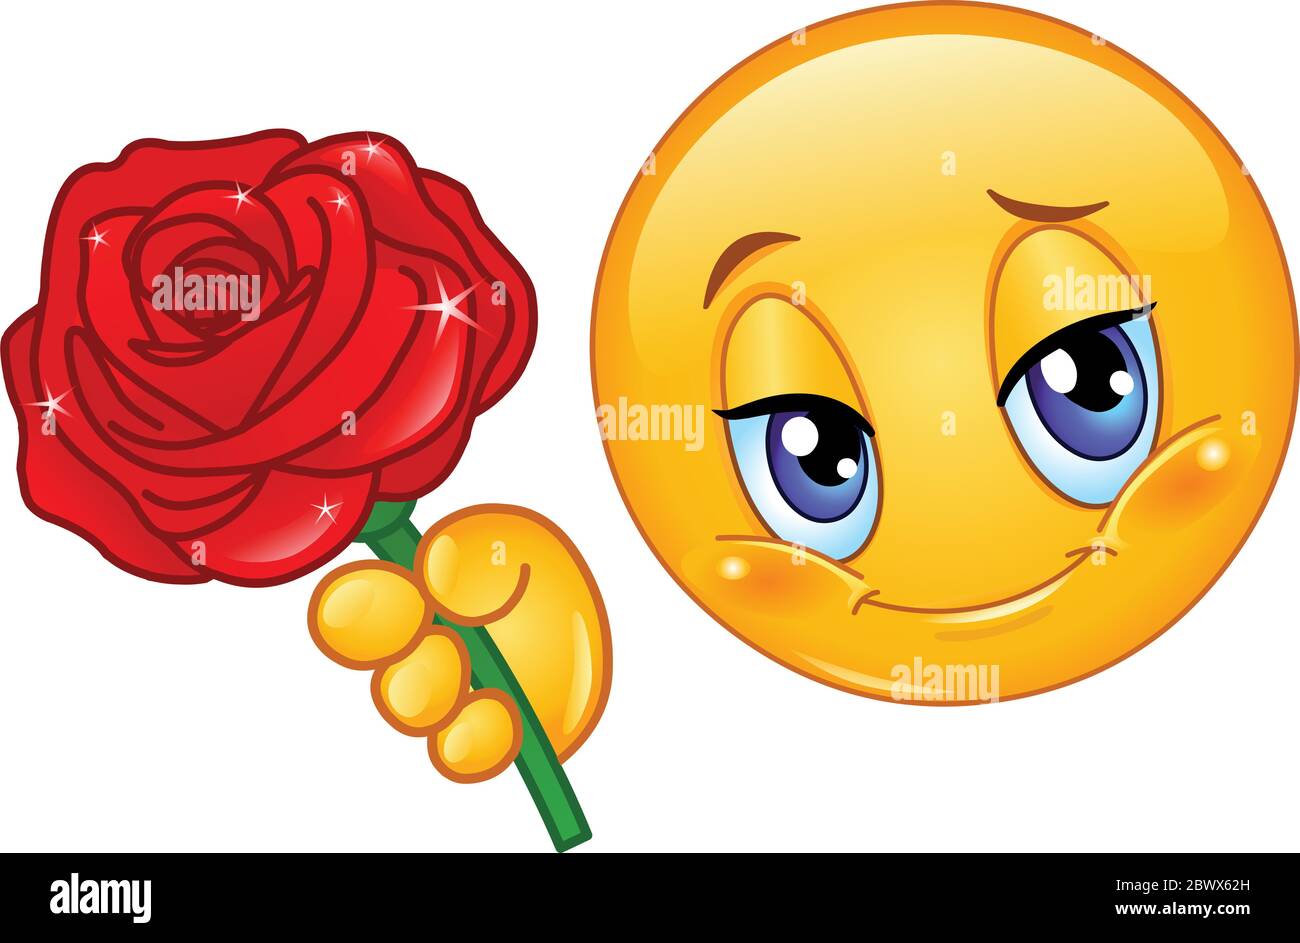 Emoticon giving a red rose Stock Vector